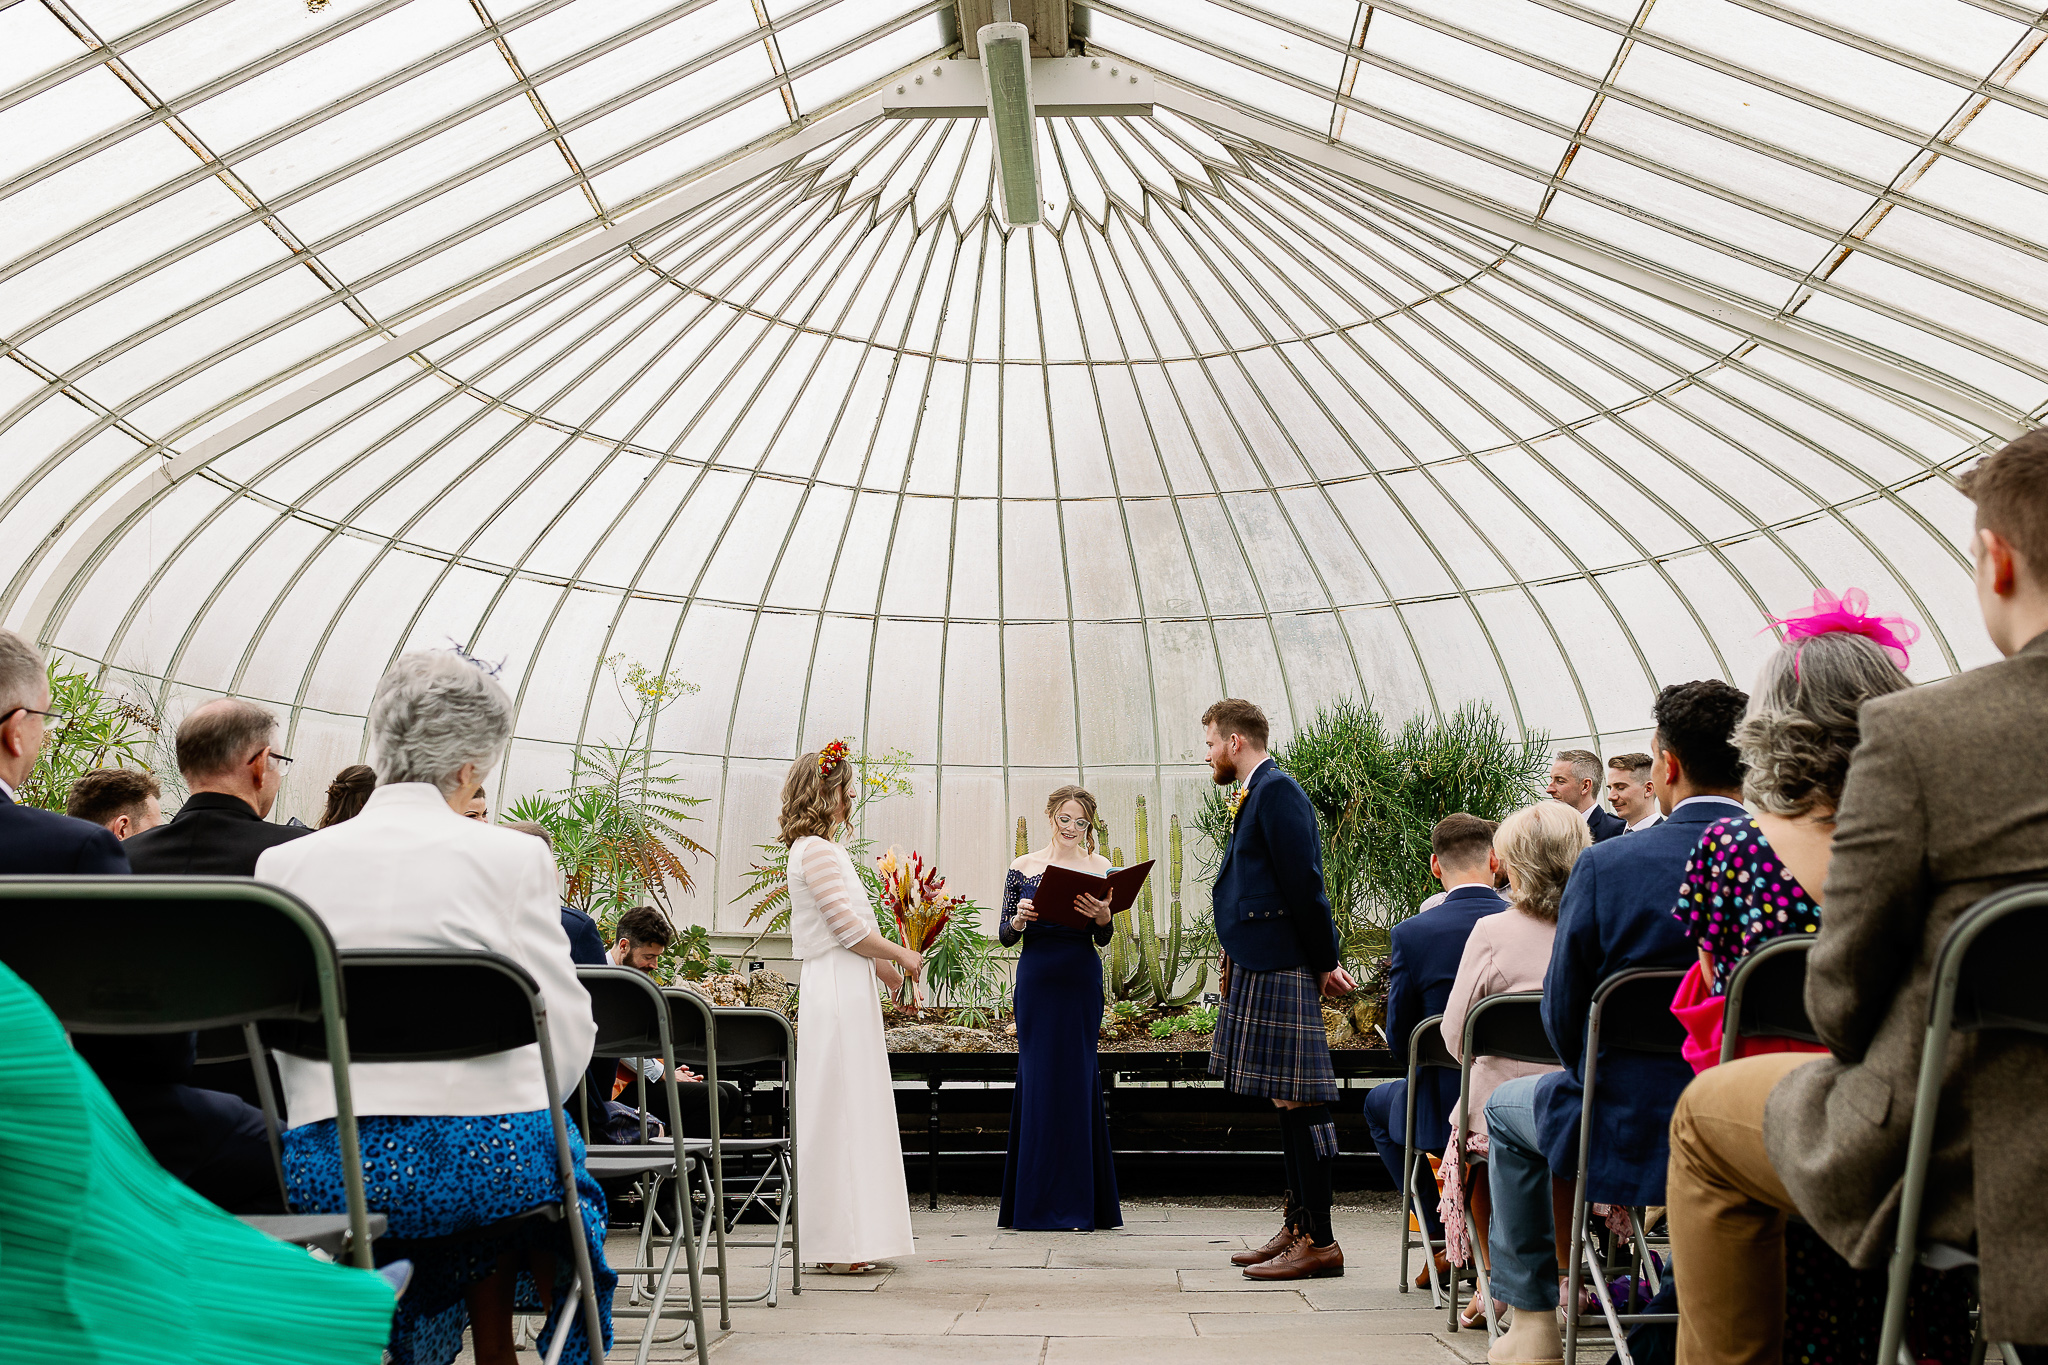 Getting married in the Glasgow Botanical Gardens 